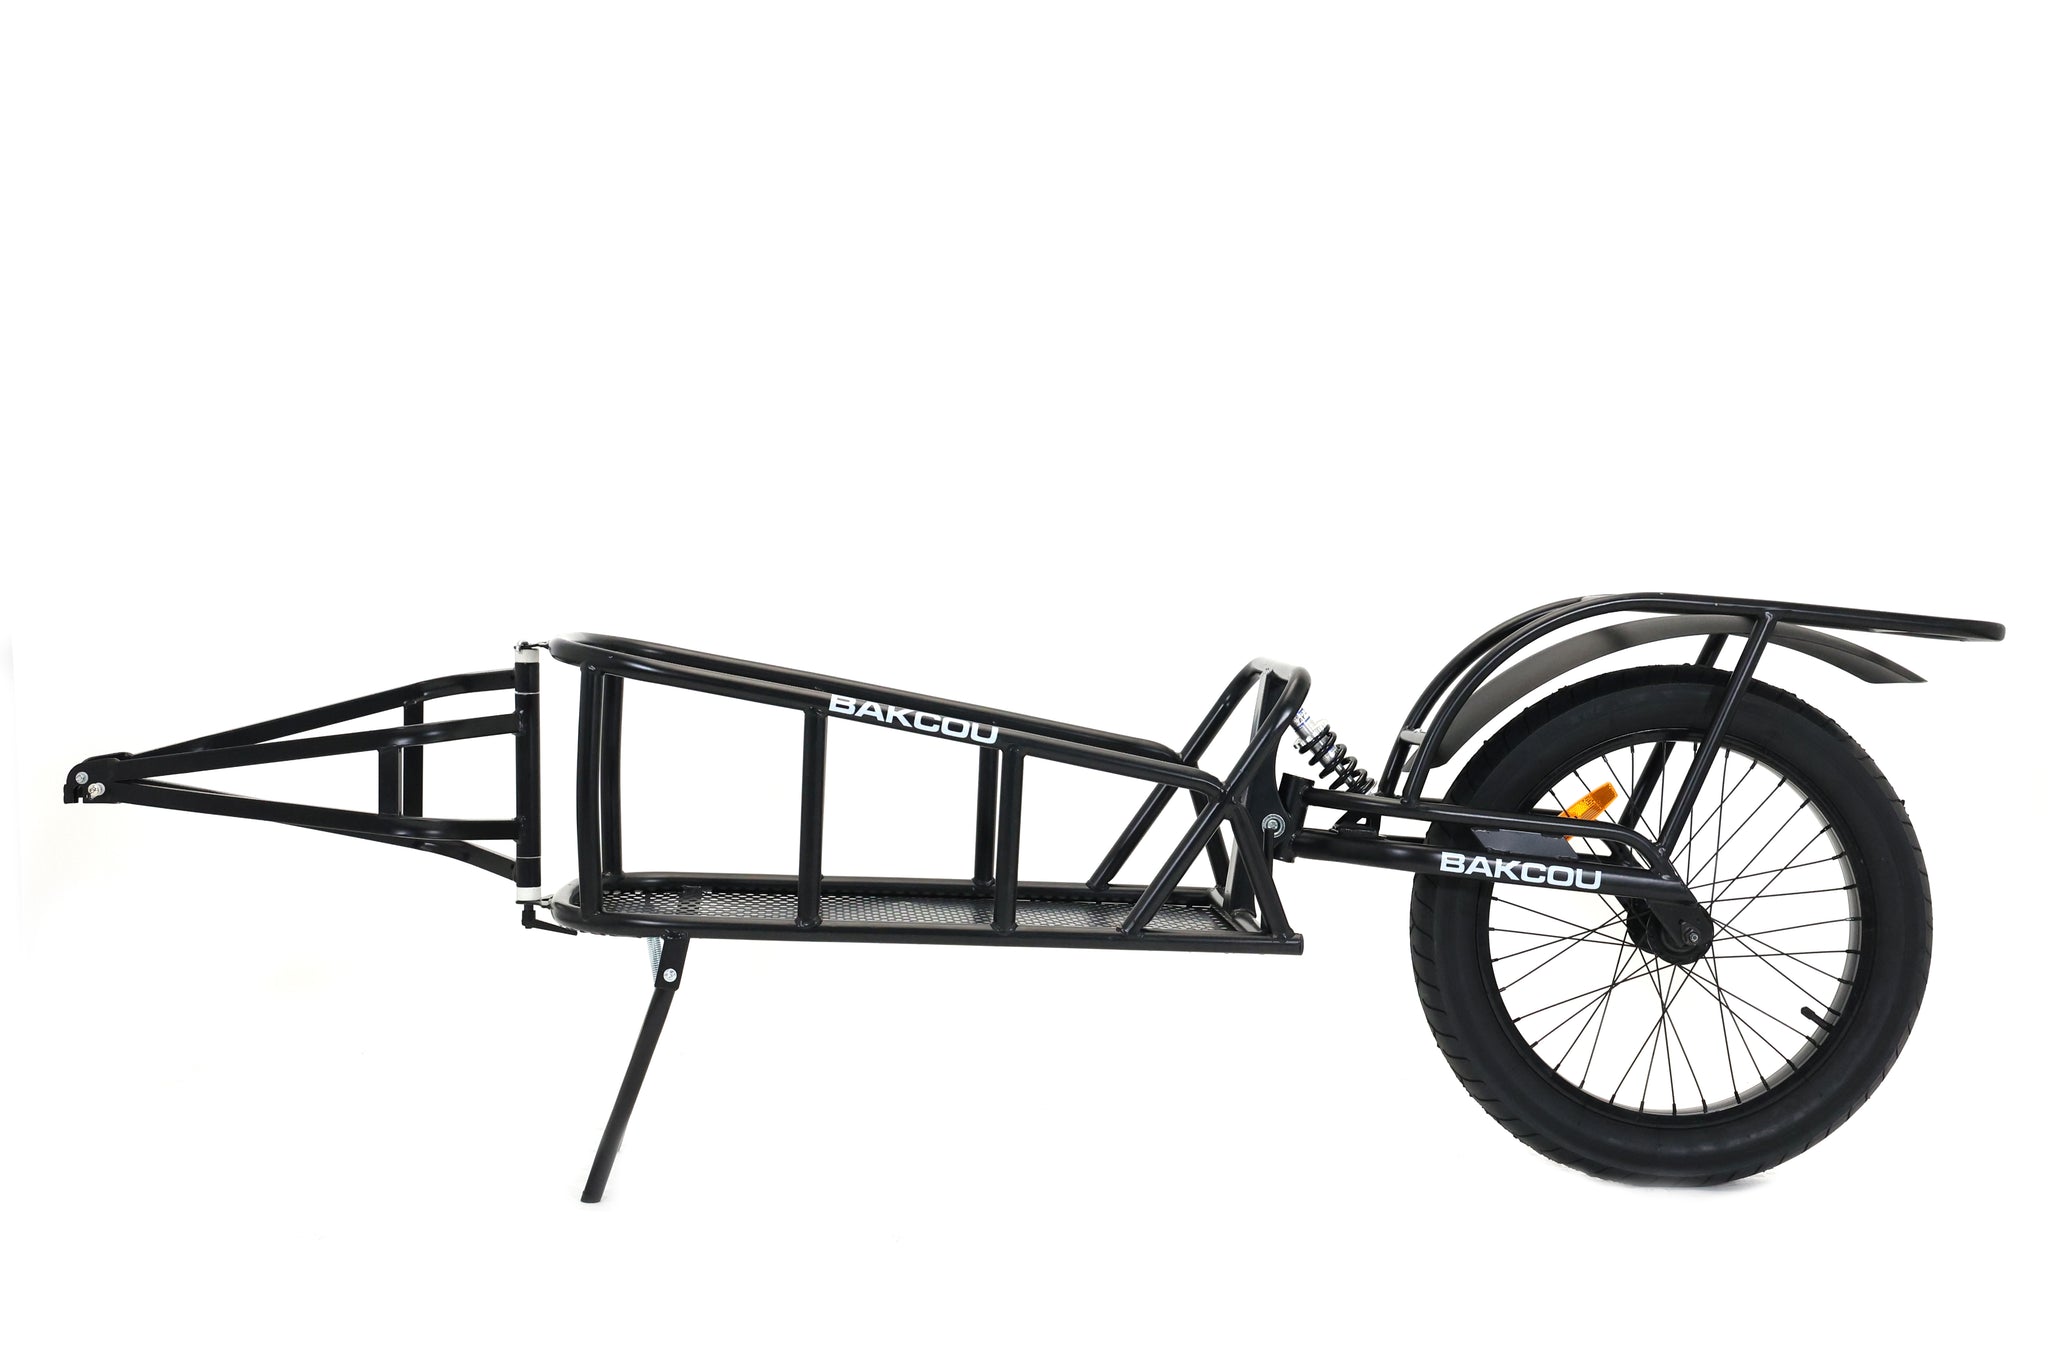 Single Wheel Trailer - Compatible with Mule and Storm